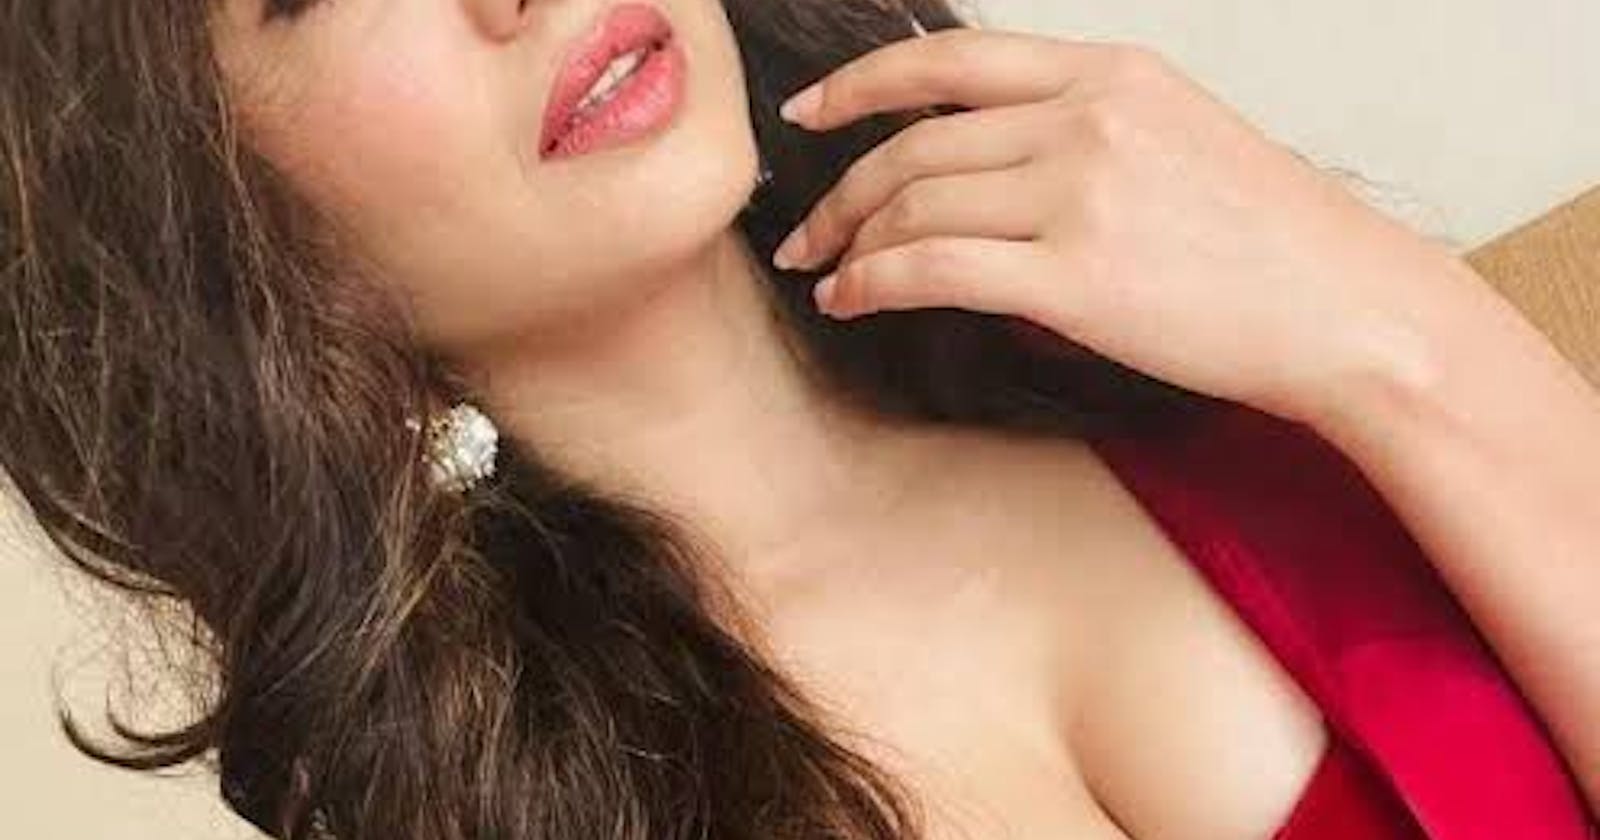 Hire High-Class Jaipur Call Service at Low-Rates
TOP INDIAN GIRLS, MATURE WOMEN, HORNY RUSSIAN, HOT BHABHI AND MANY OTHER INDEPENDENT CALL GIRLS WA